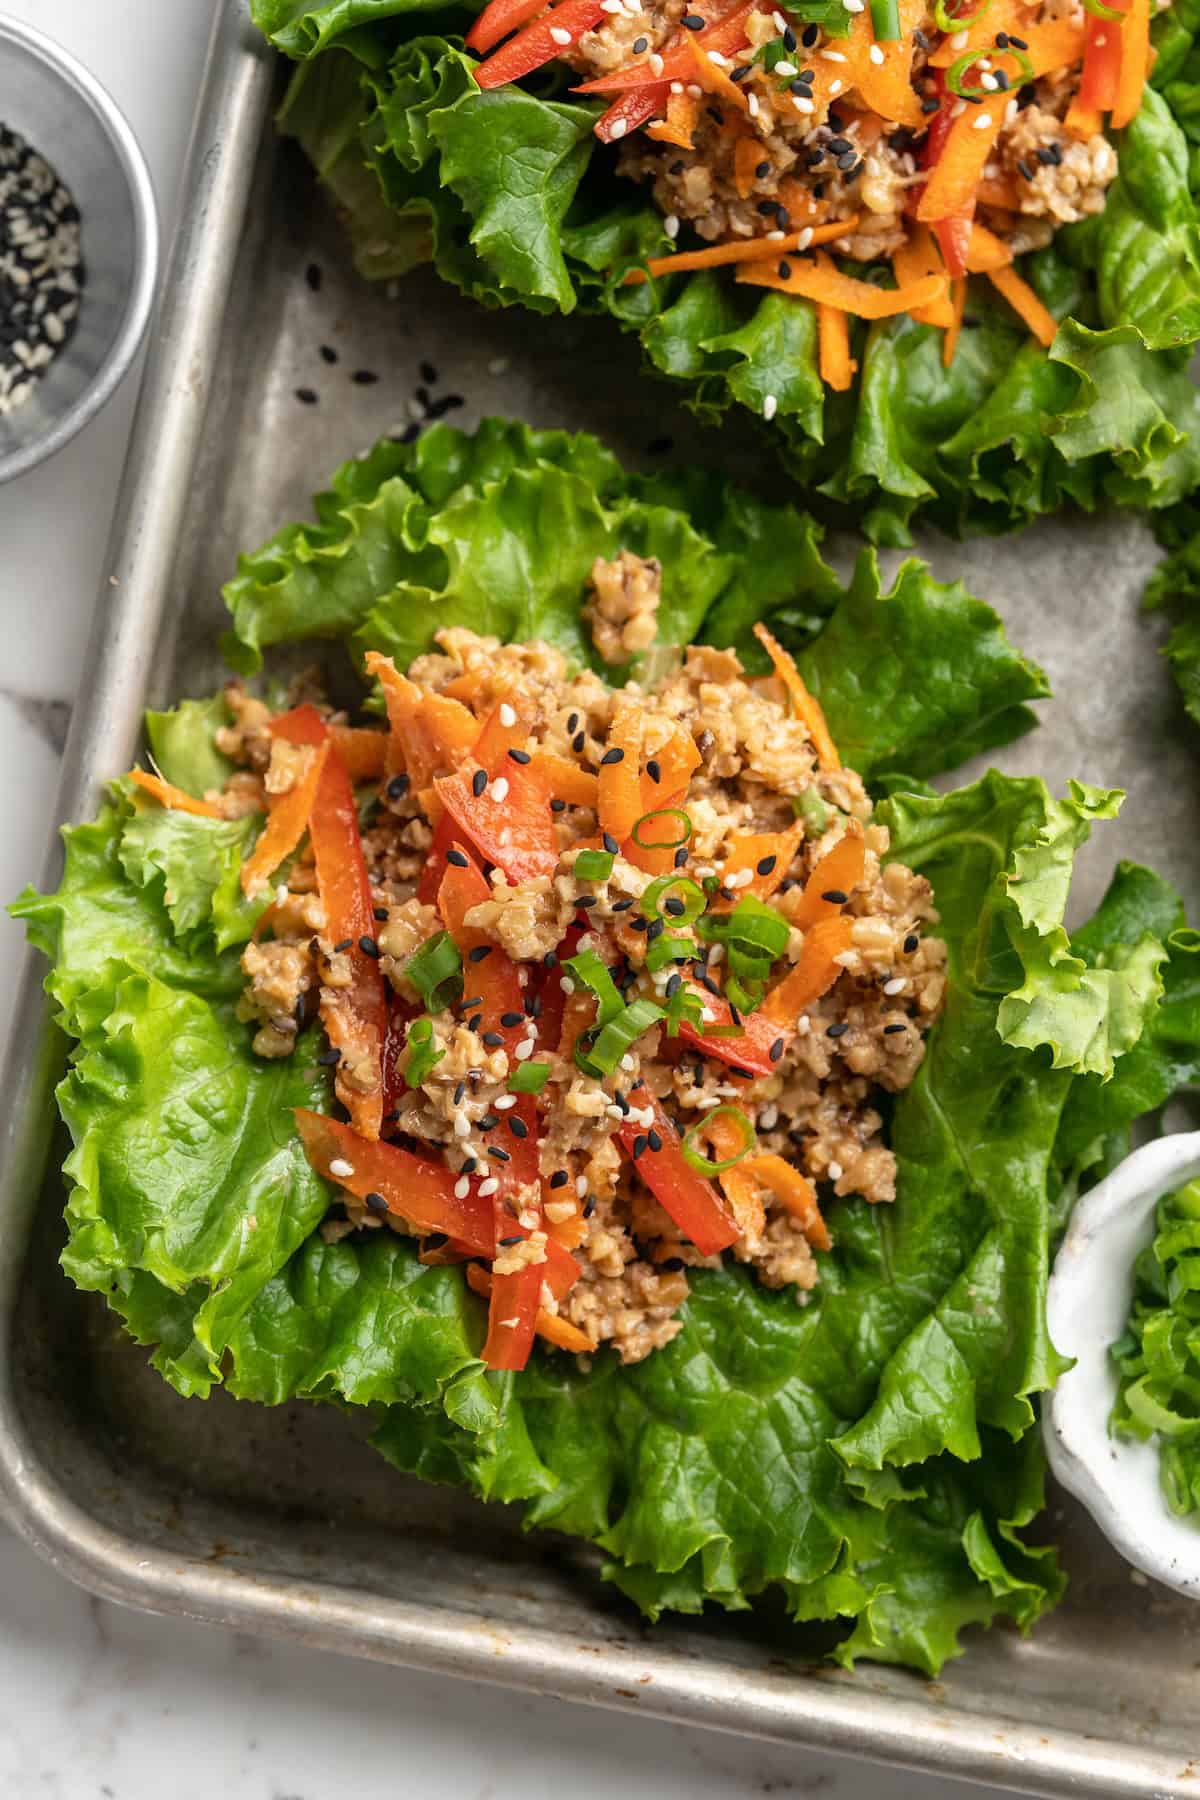 Overhead view of lettuce wraps on sheet pan